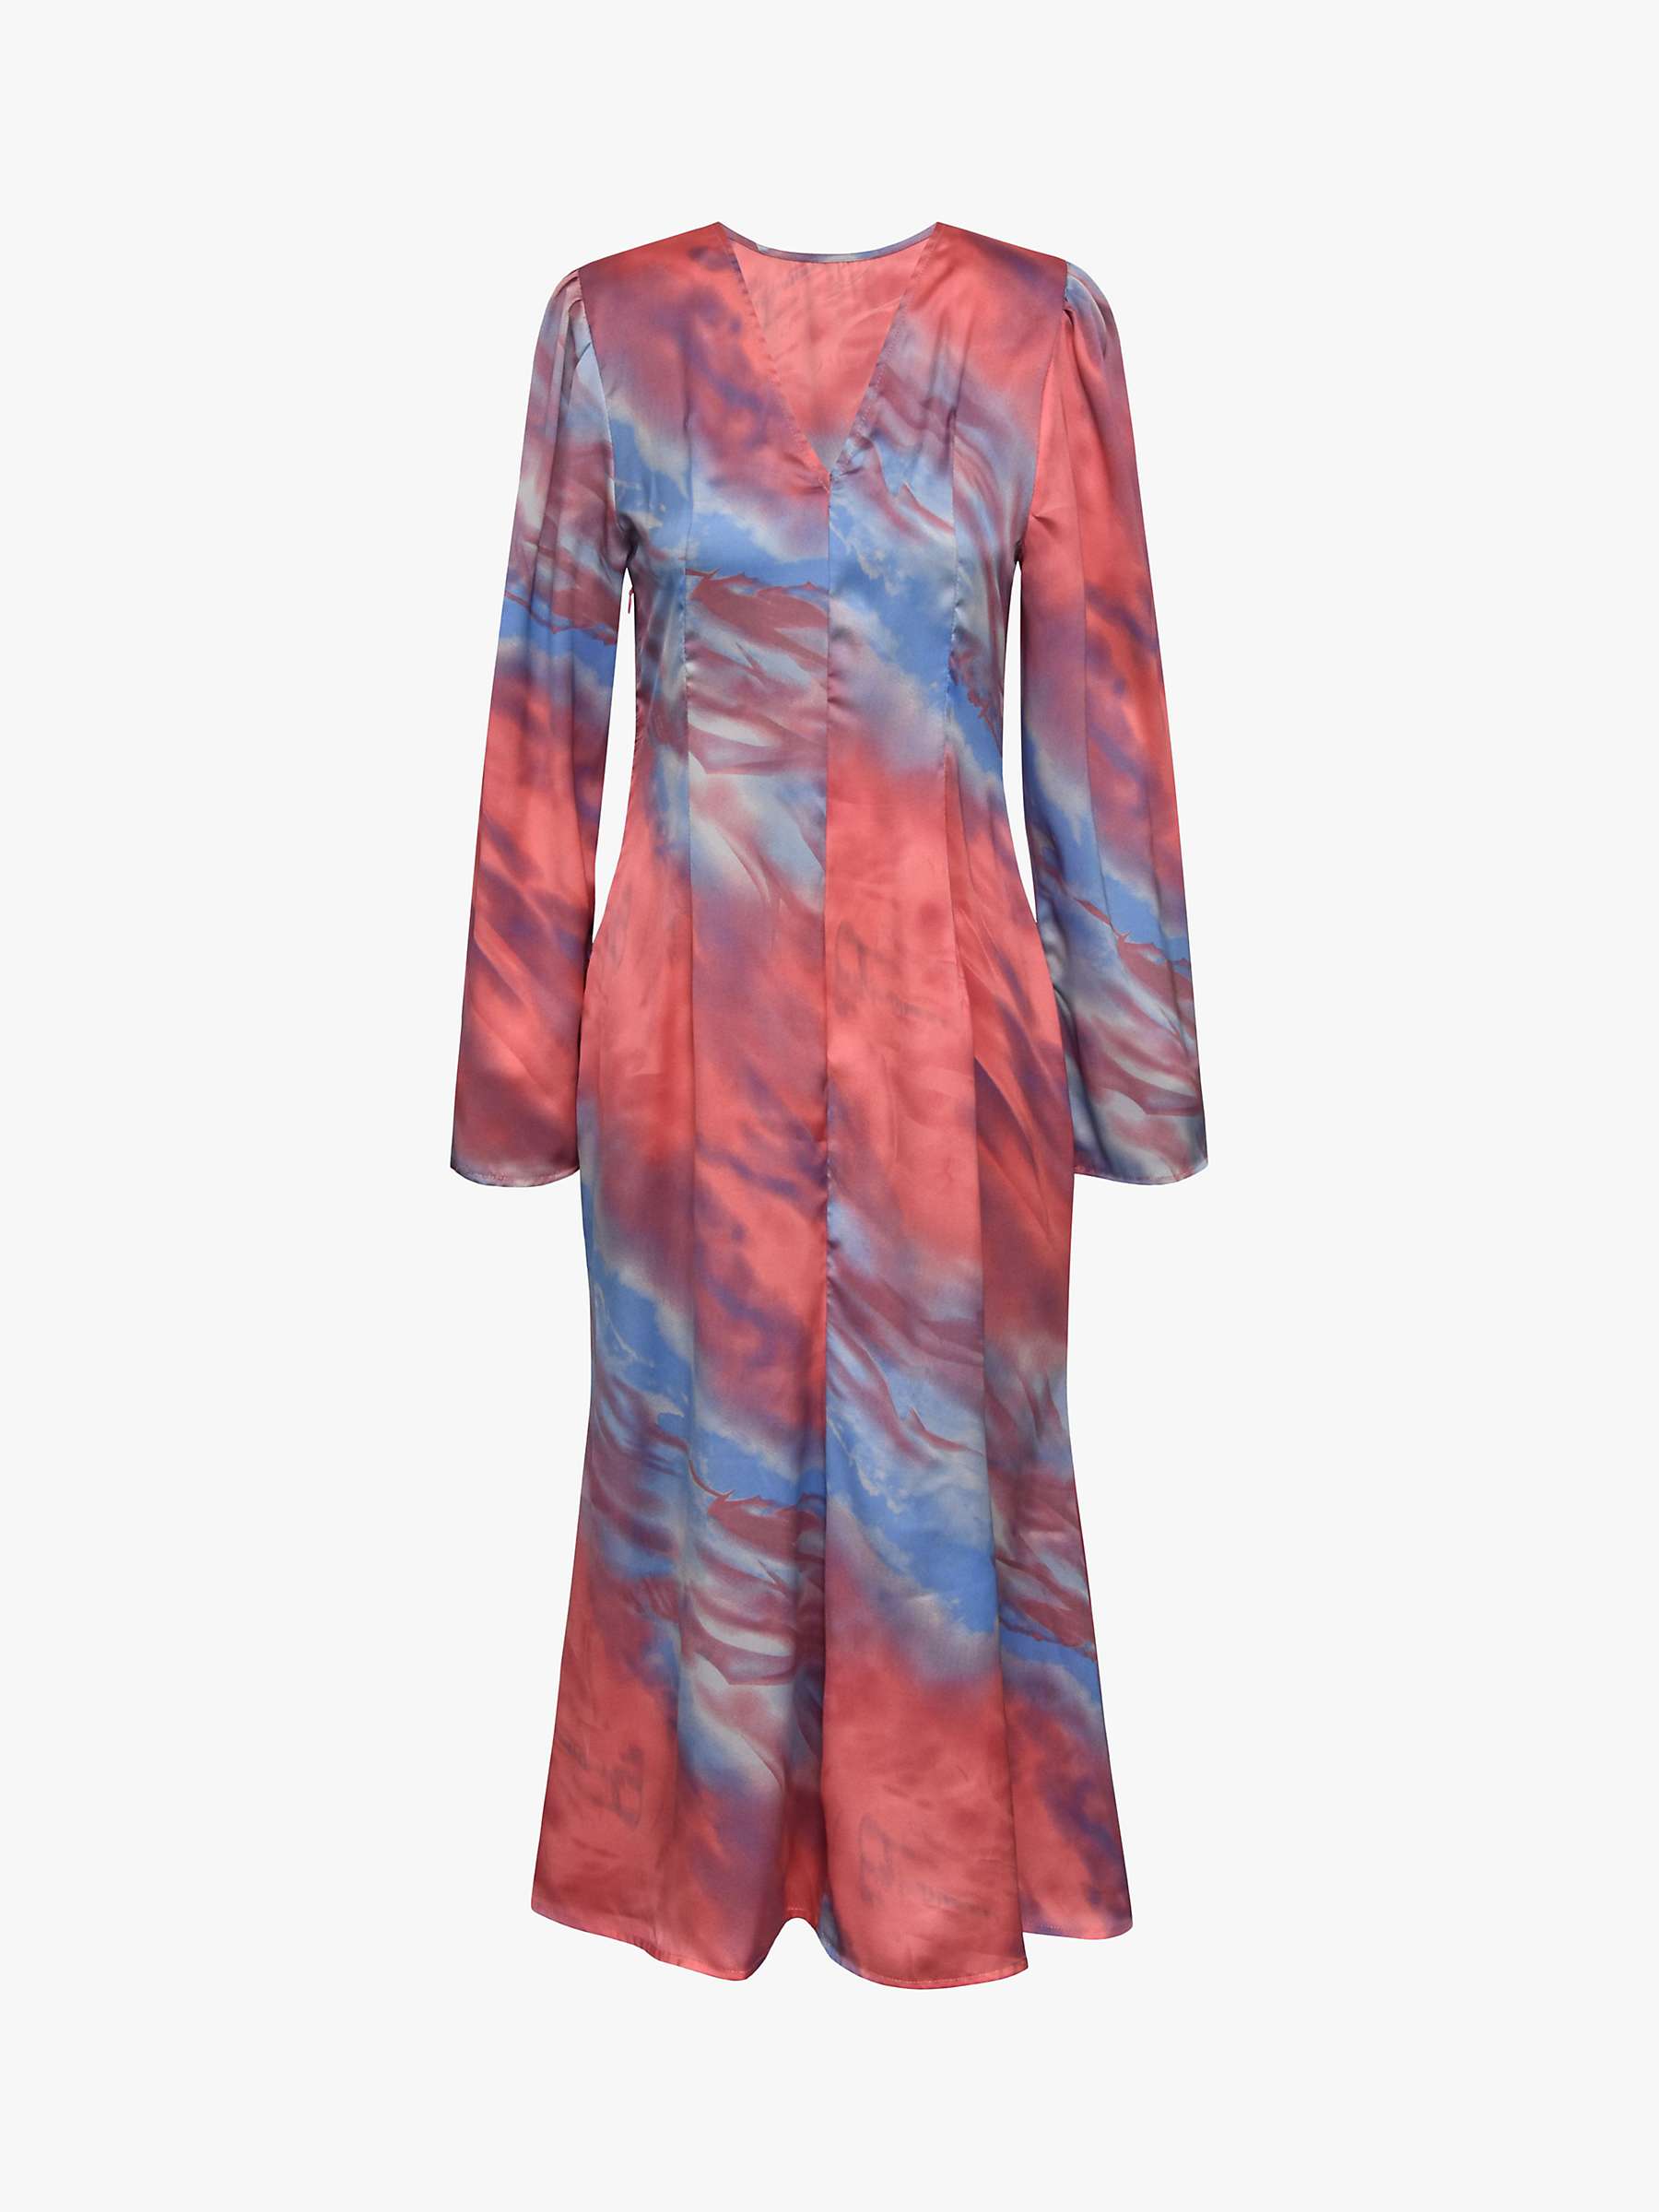 Buy A-VIEW Carina Midi Dress, 256 Coral/Blue Online at johnlewis.com